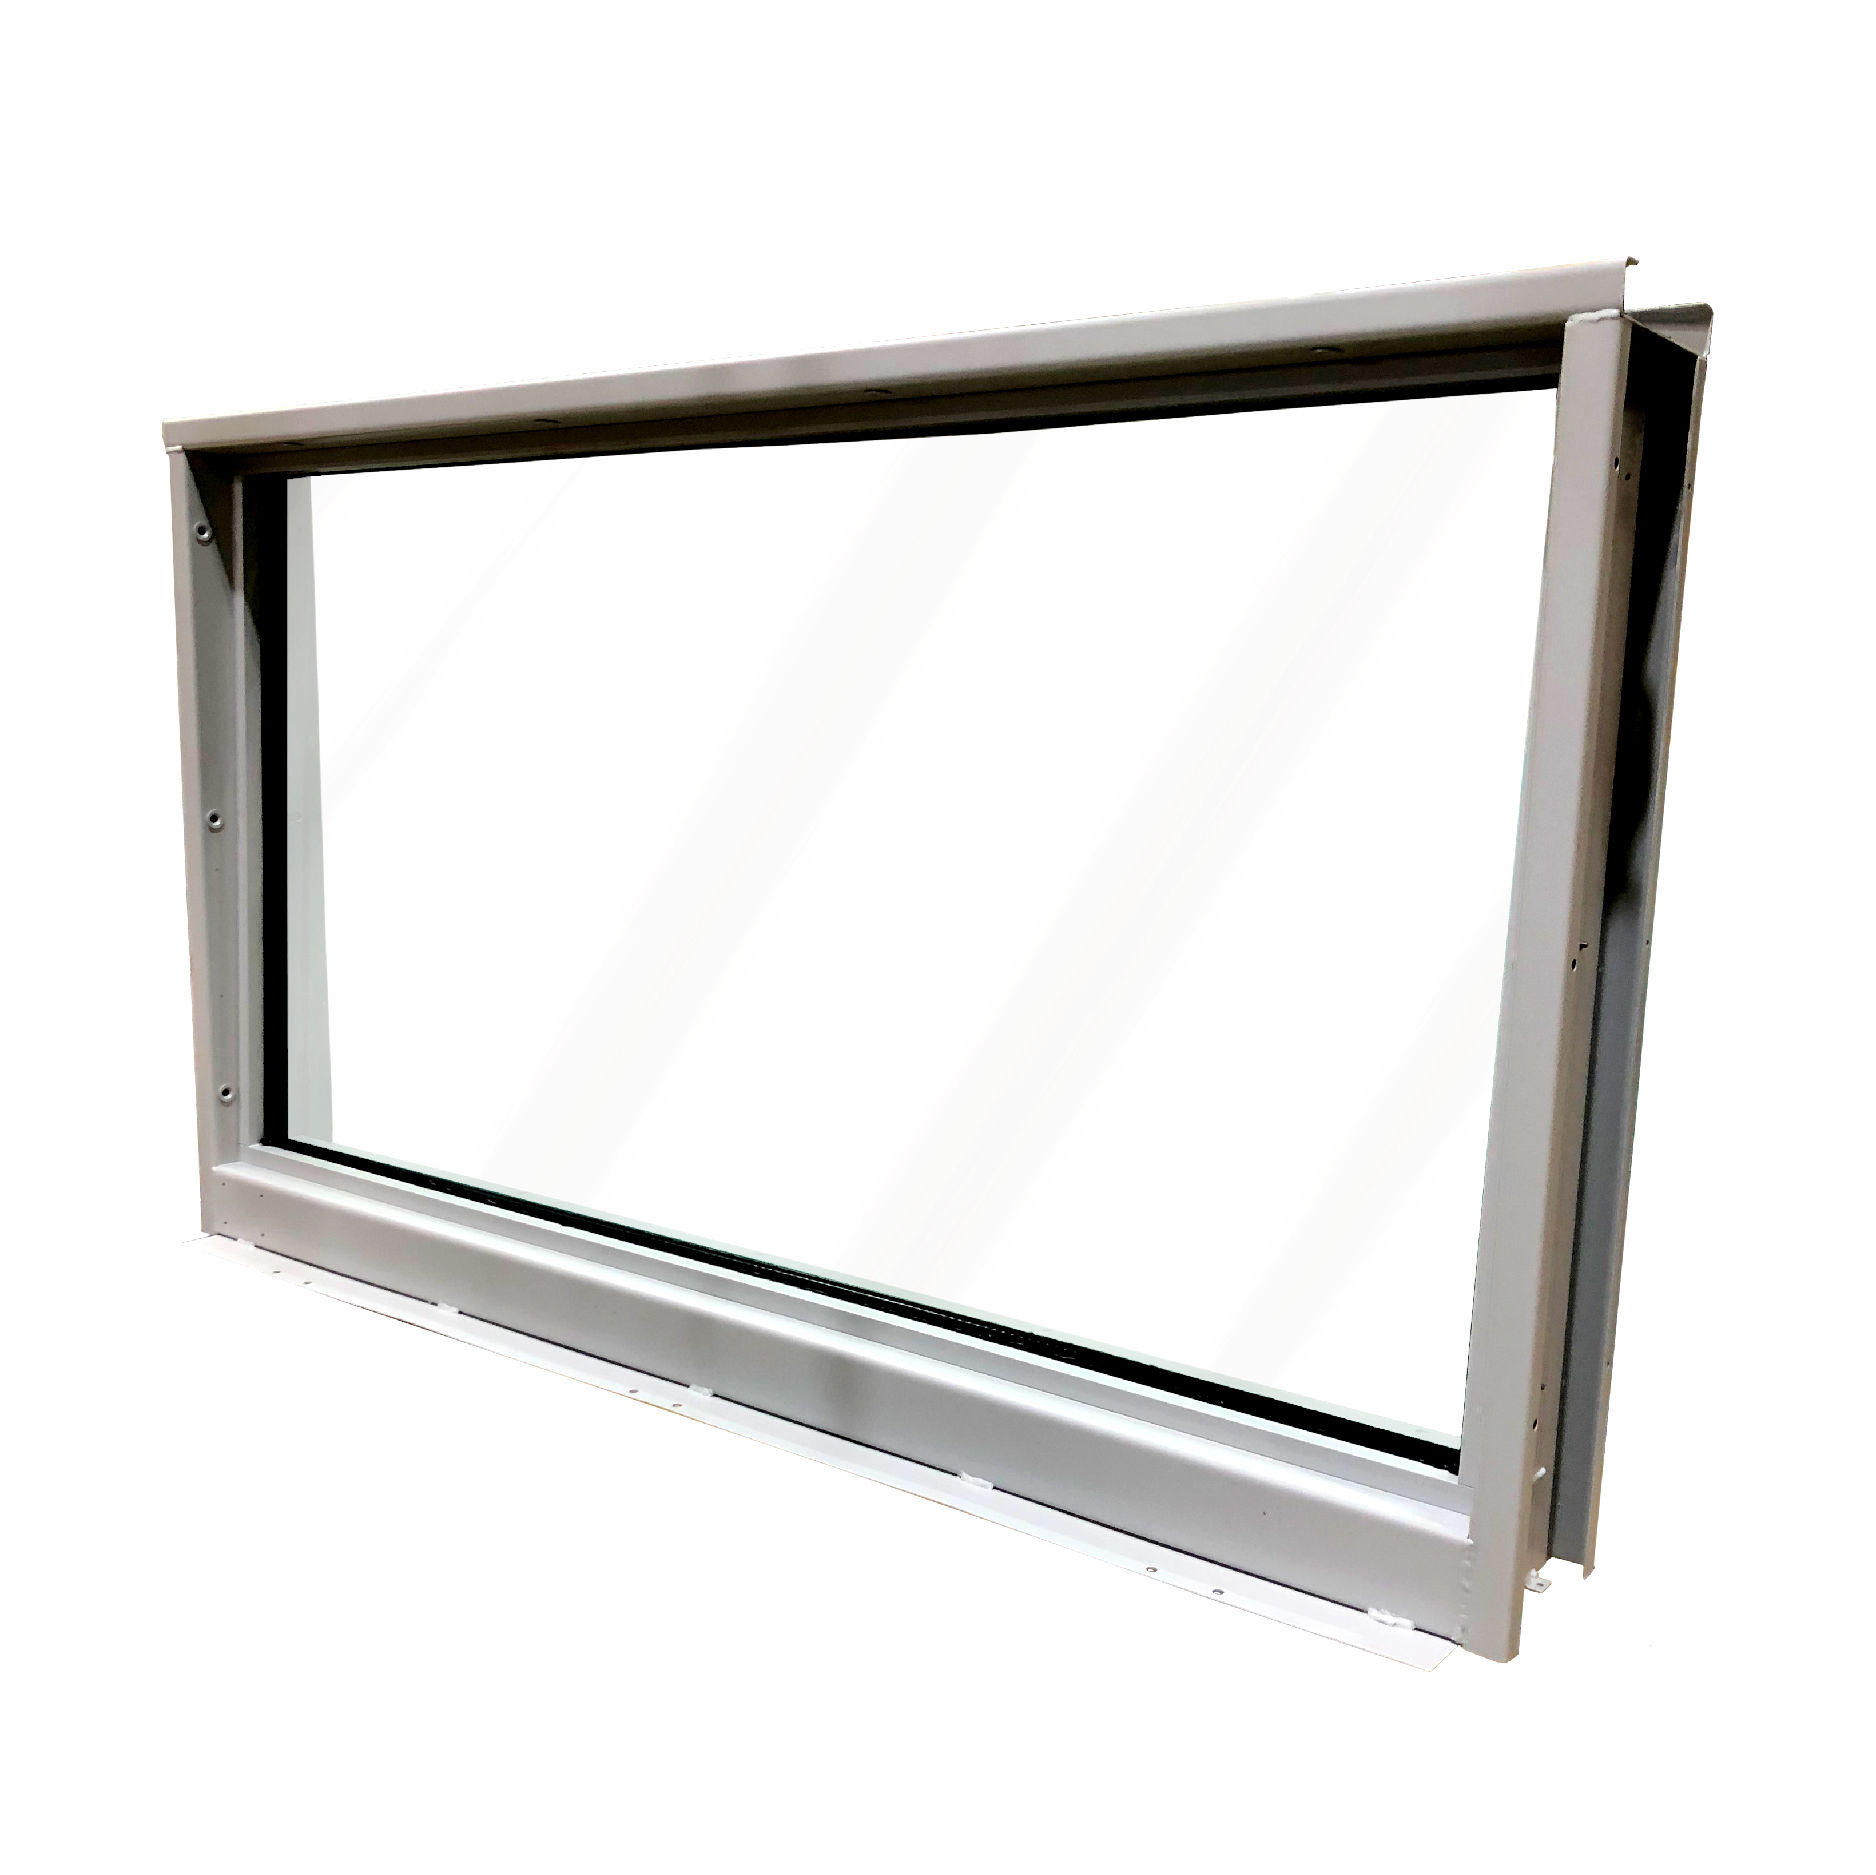 Picture for category 112x32 Hurricane HVHZ Security Window - 12103994